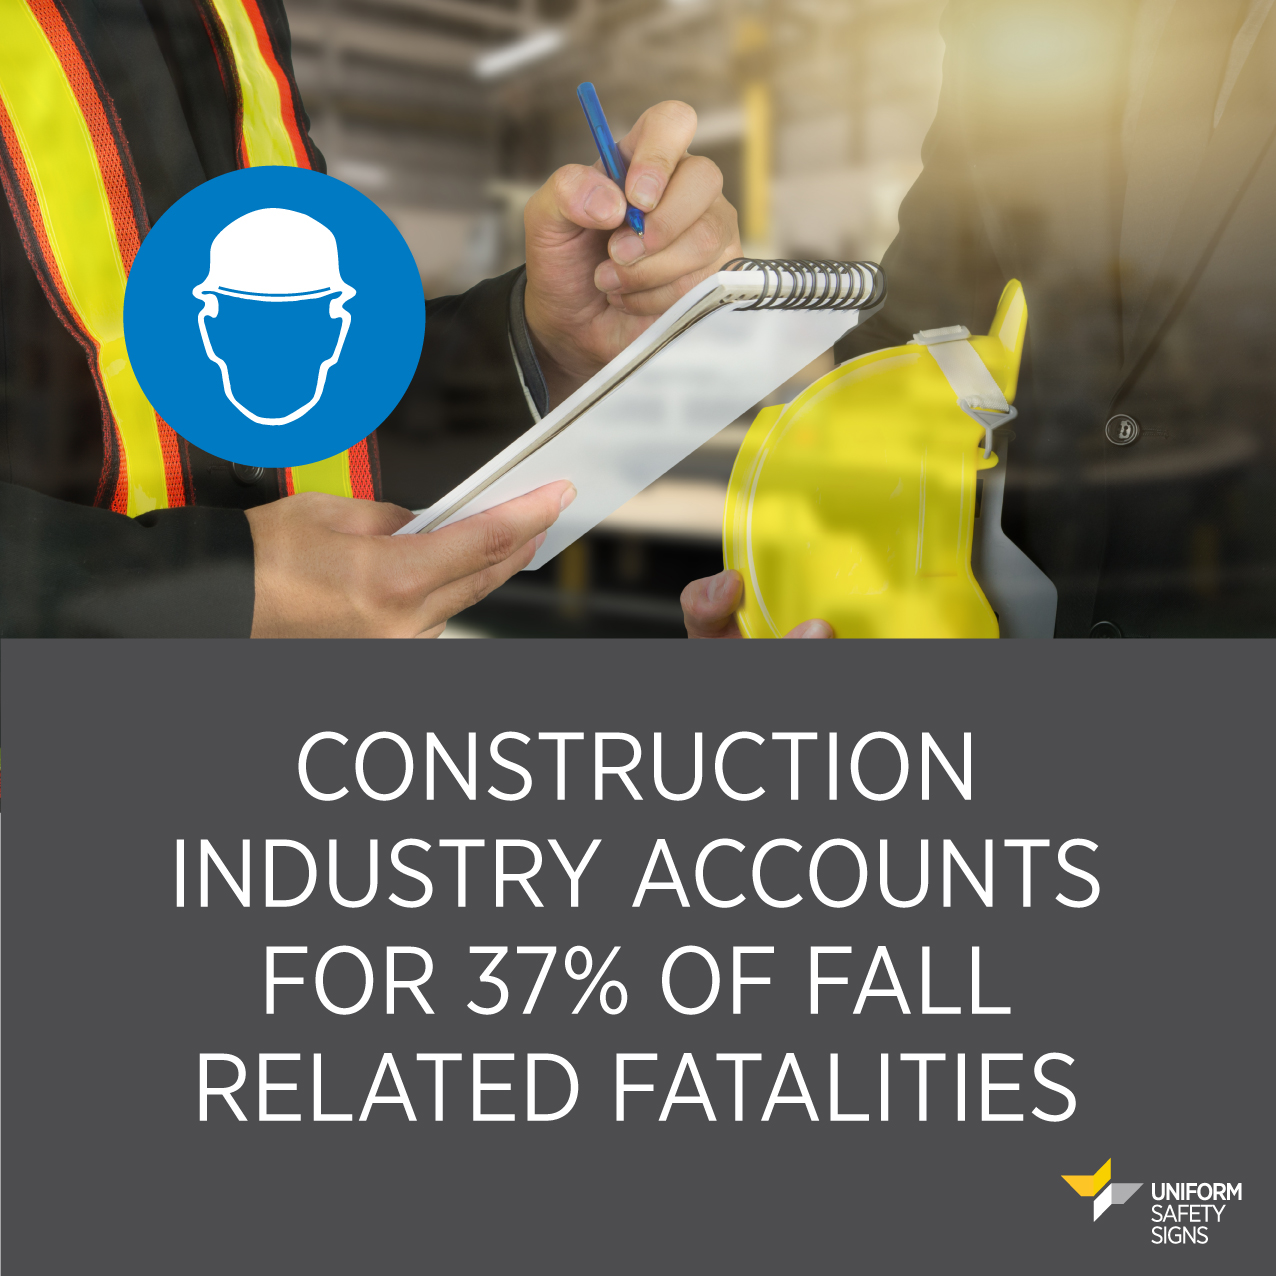 Construction Industry Accounts For 37% Of Fall Related Fatalities